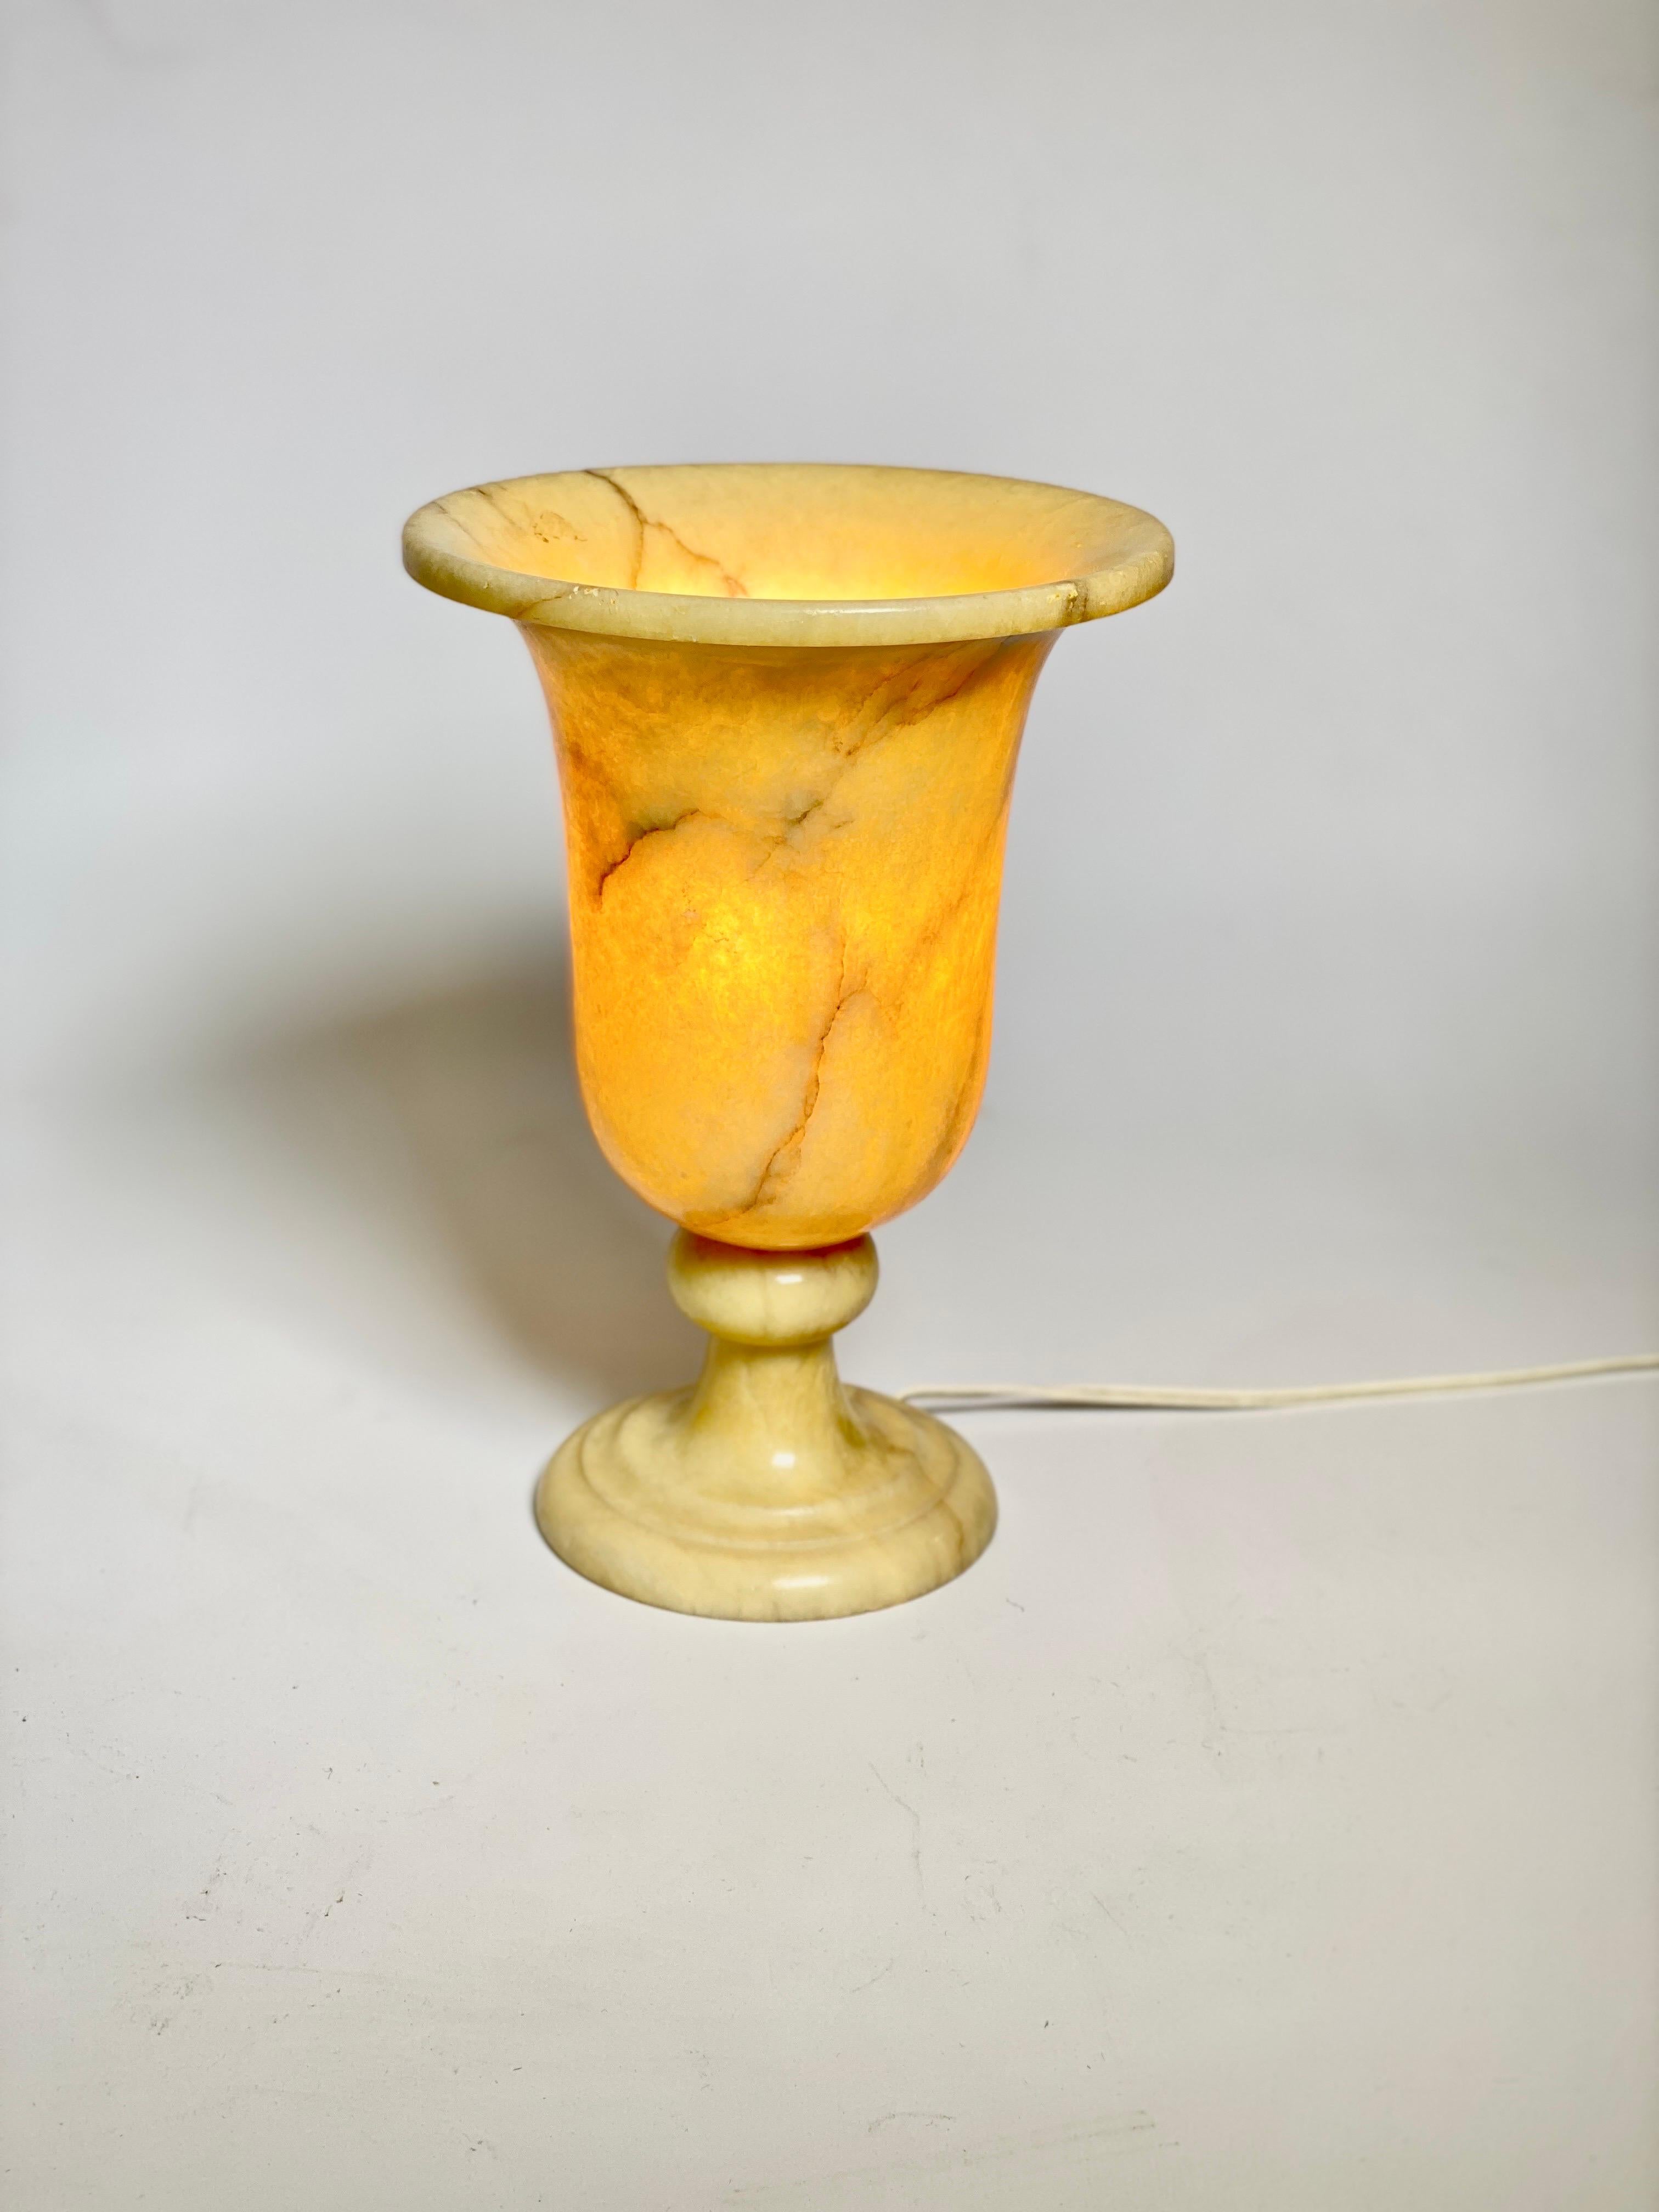 Sculptural alabaster Art Deco period Urn table lamp with neoclassical design, France, 1940s.
This elegant carved alabaster neoclassical 'uplighter' urn lamp will be a nice addition placed in a console table or side table.
It provides a charming